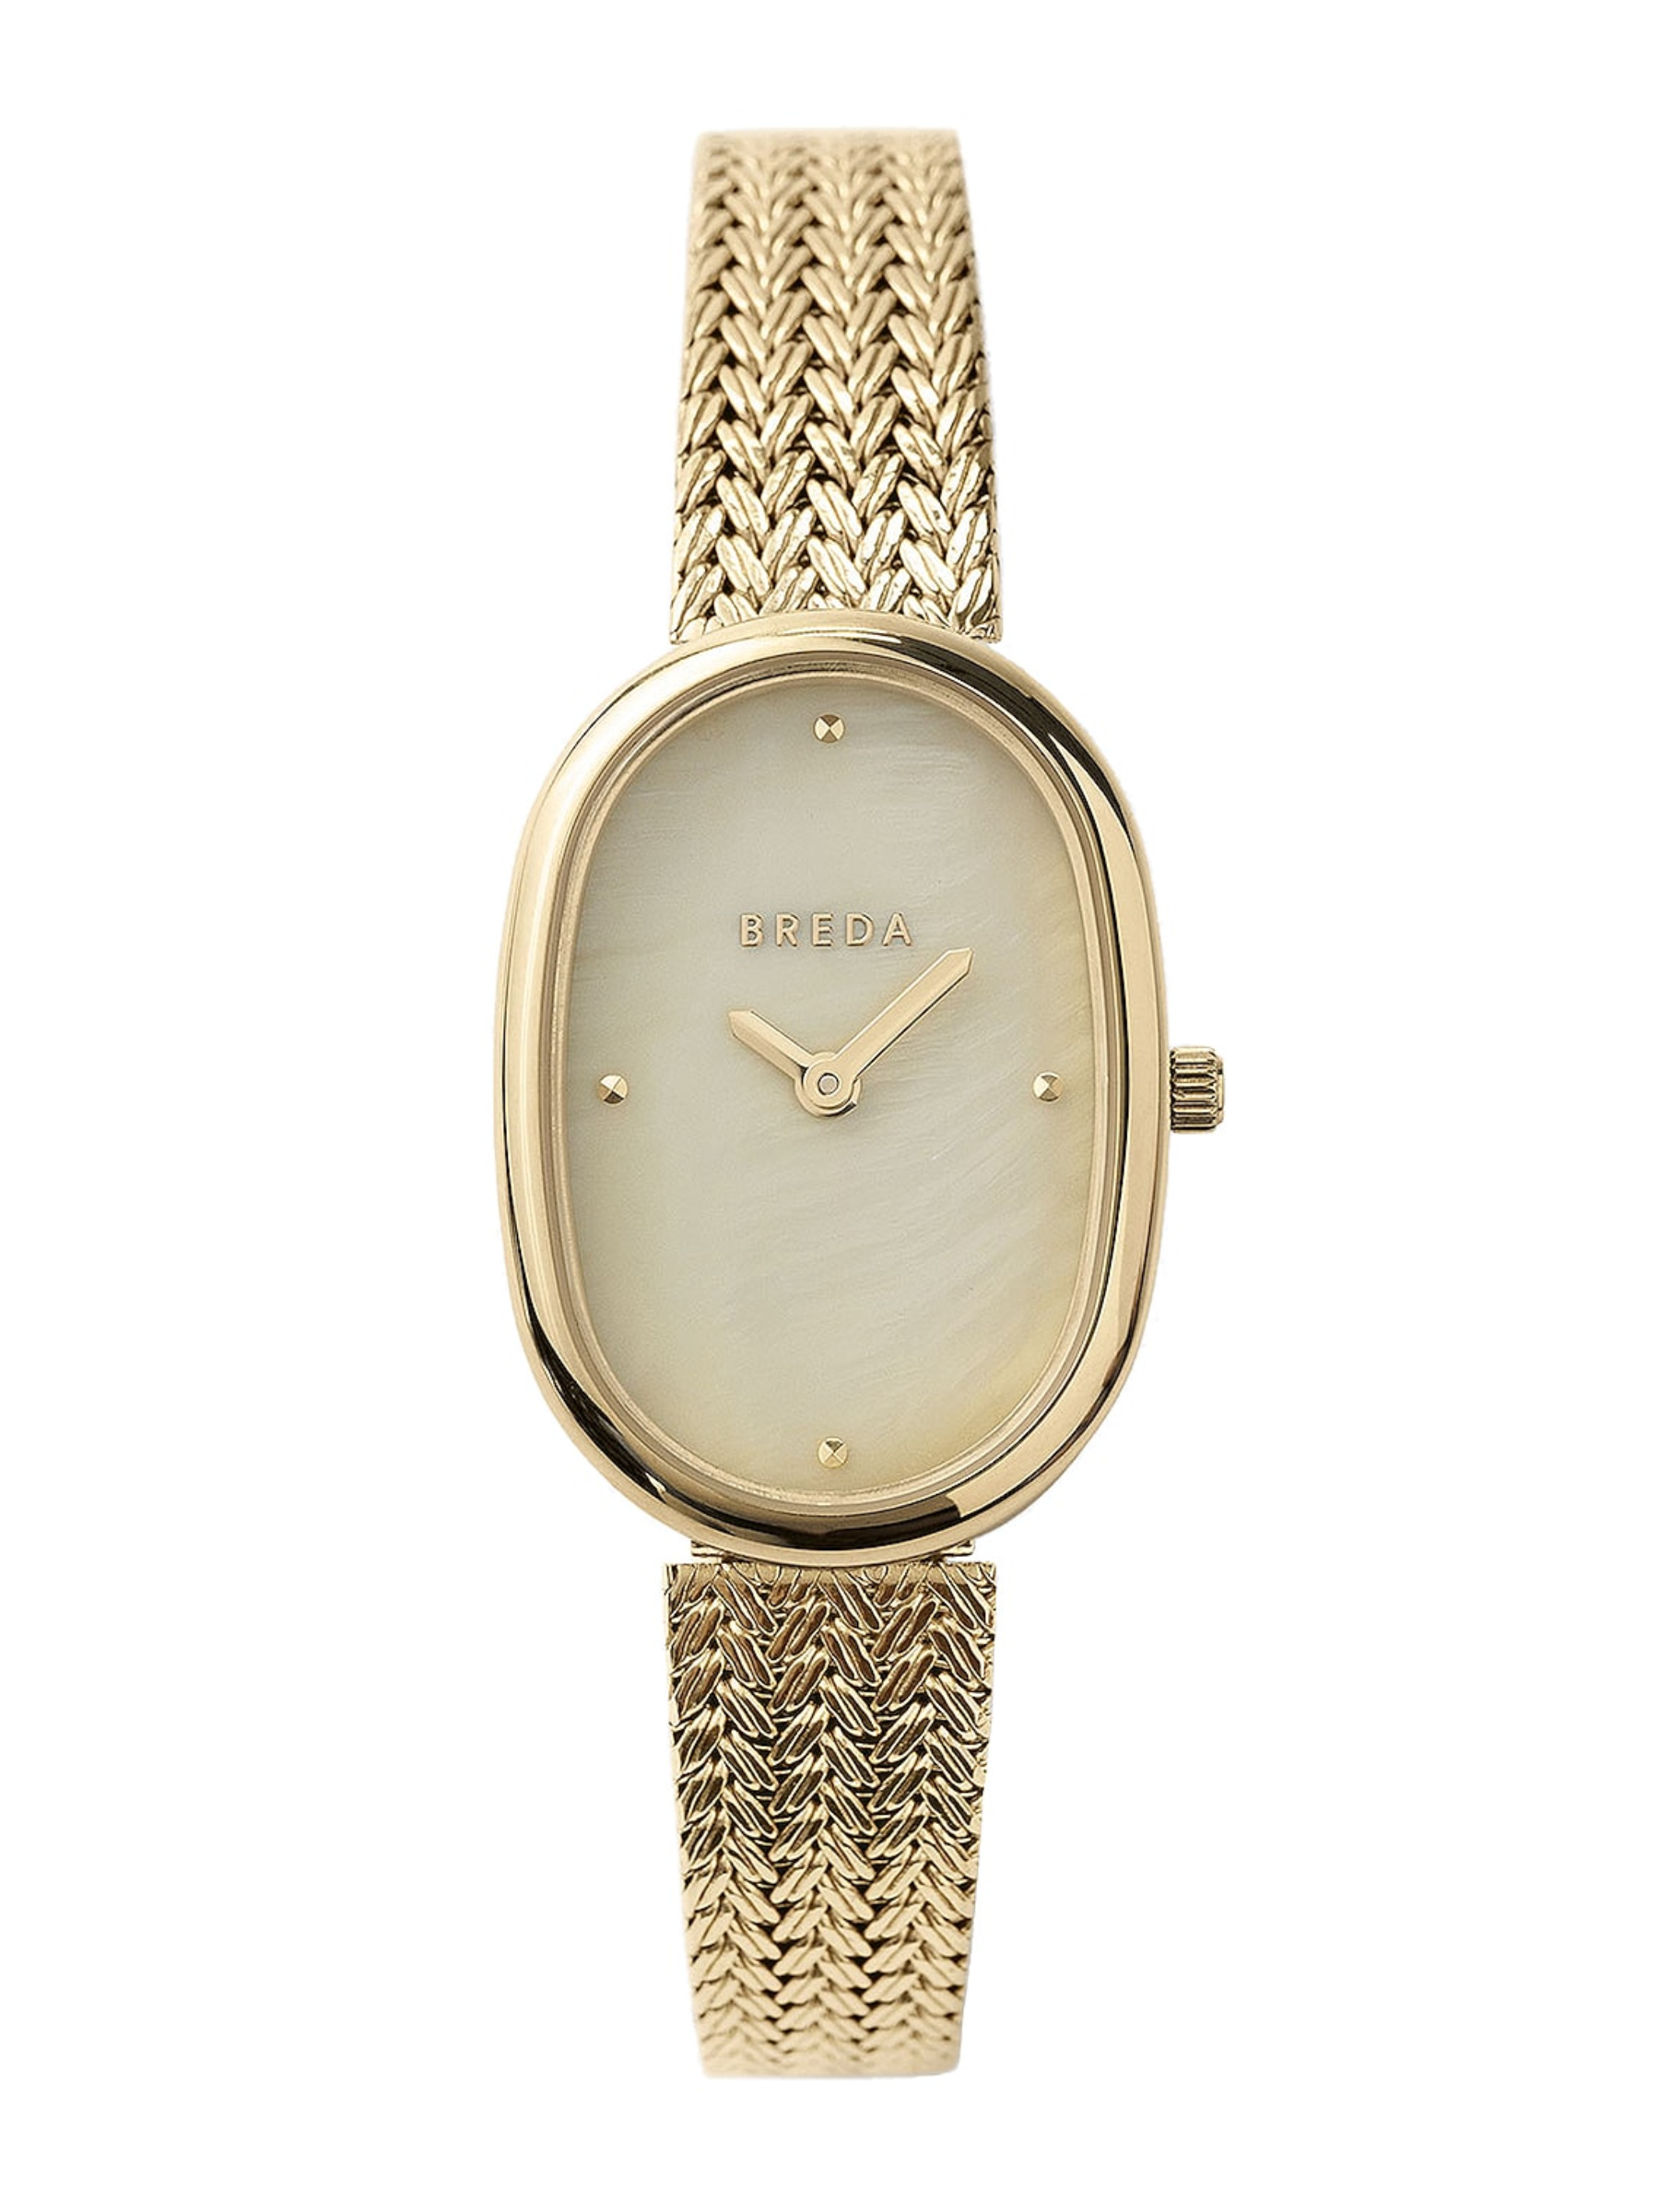 They can give their smartwatch a break with this luxe watch. The sleek design is perfect for more professional and formal settings, and it's easy to stack among other arm candy. $195, Revolve. <a href="https://www.revolve.com/breda-jane-watch-in-gold/dp/BEDA-WL4/">Get it now!</a><p>Sign up for today’s biggest stories, from pop culture to politics.</p><a href="https://www.glamour.com/newsletter/news?sourceCode=msnsend">Sign Up</a>